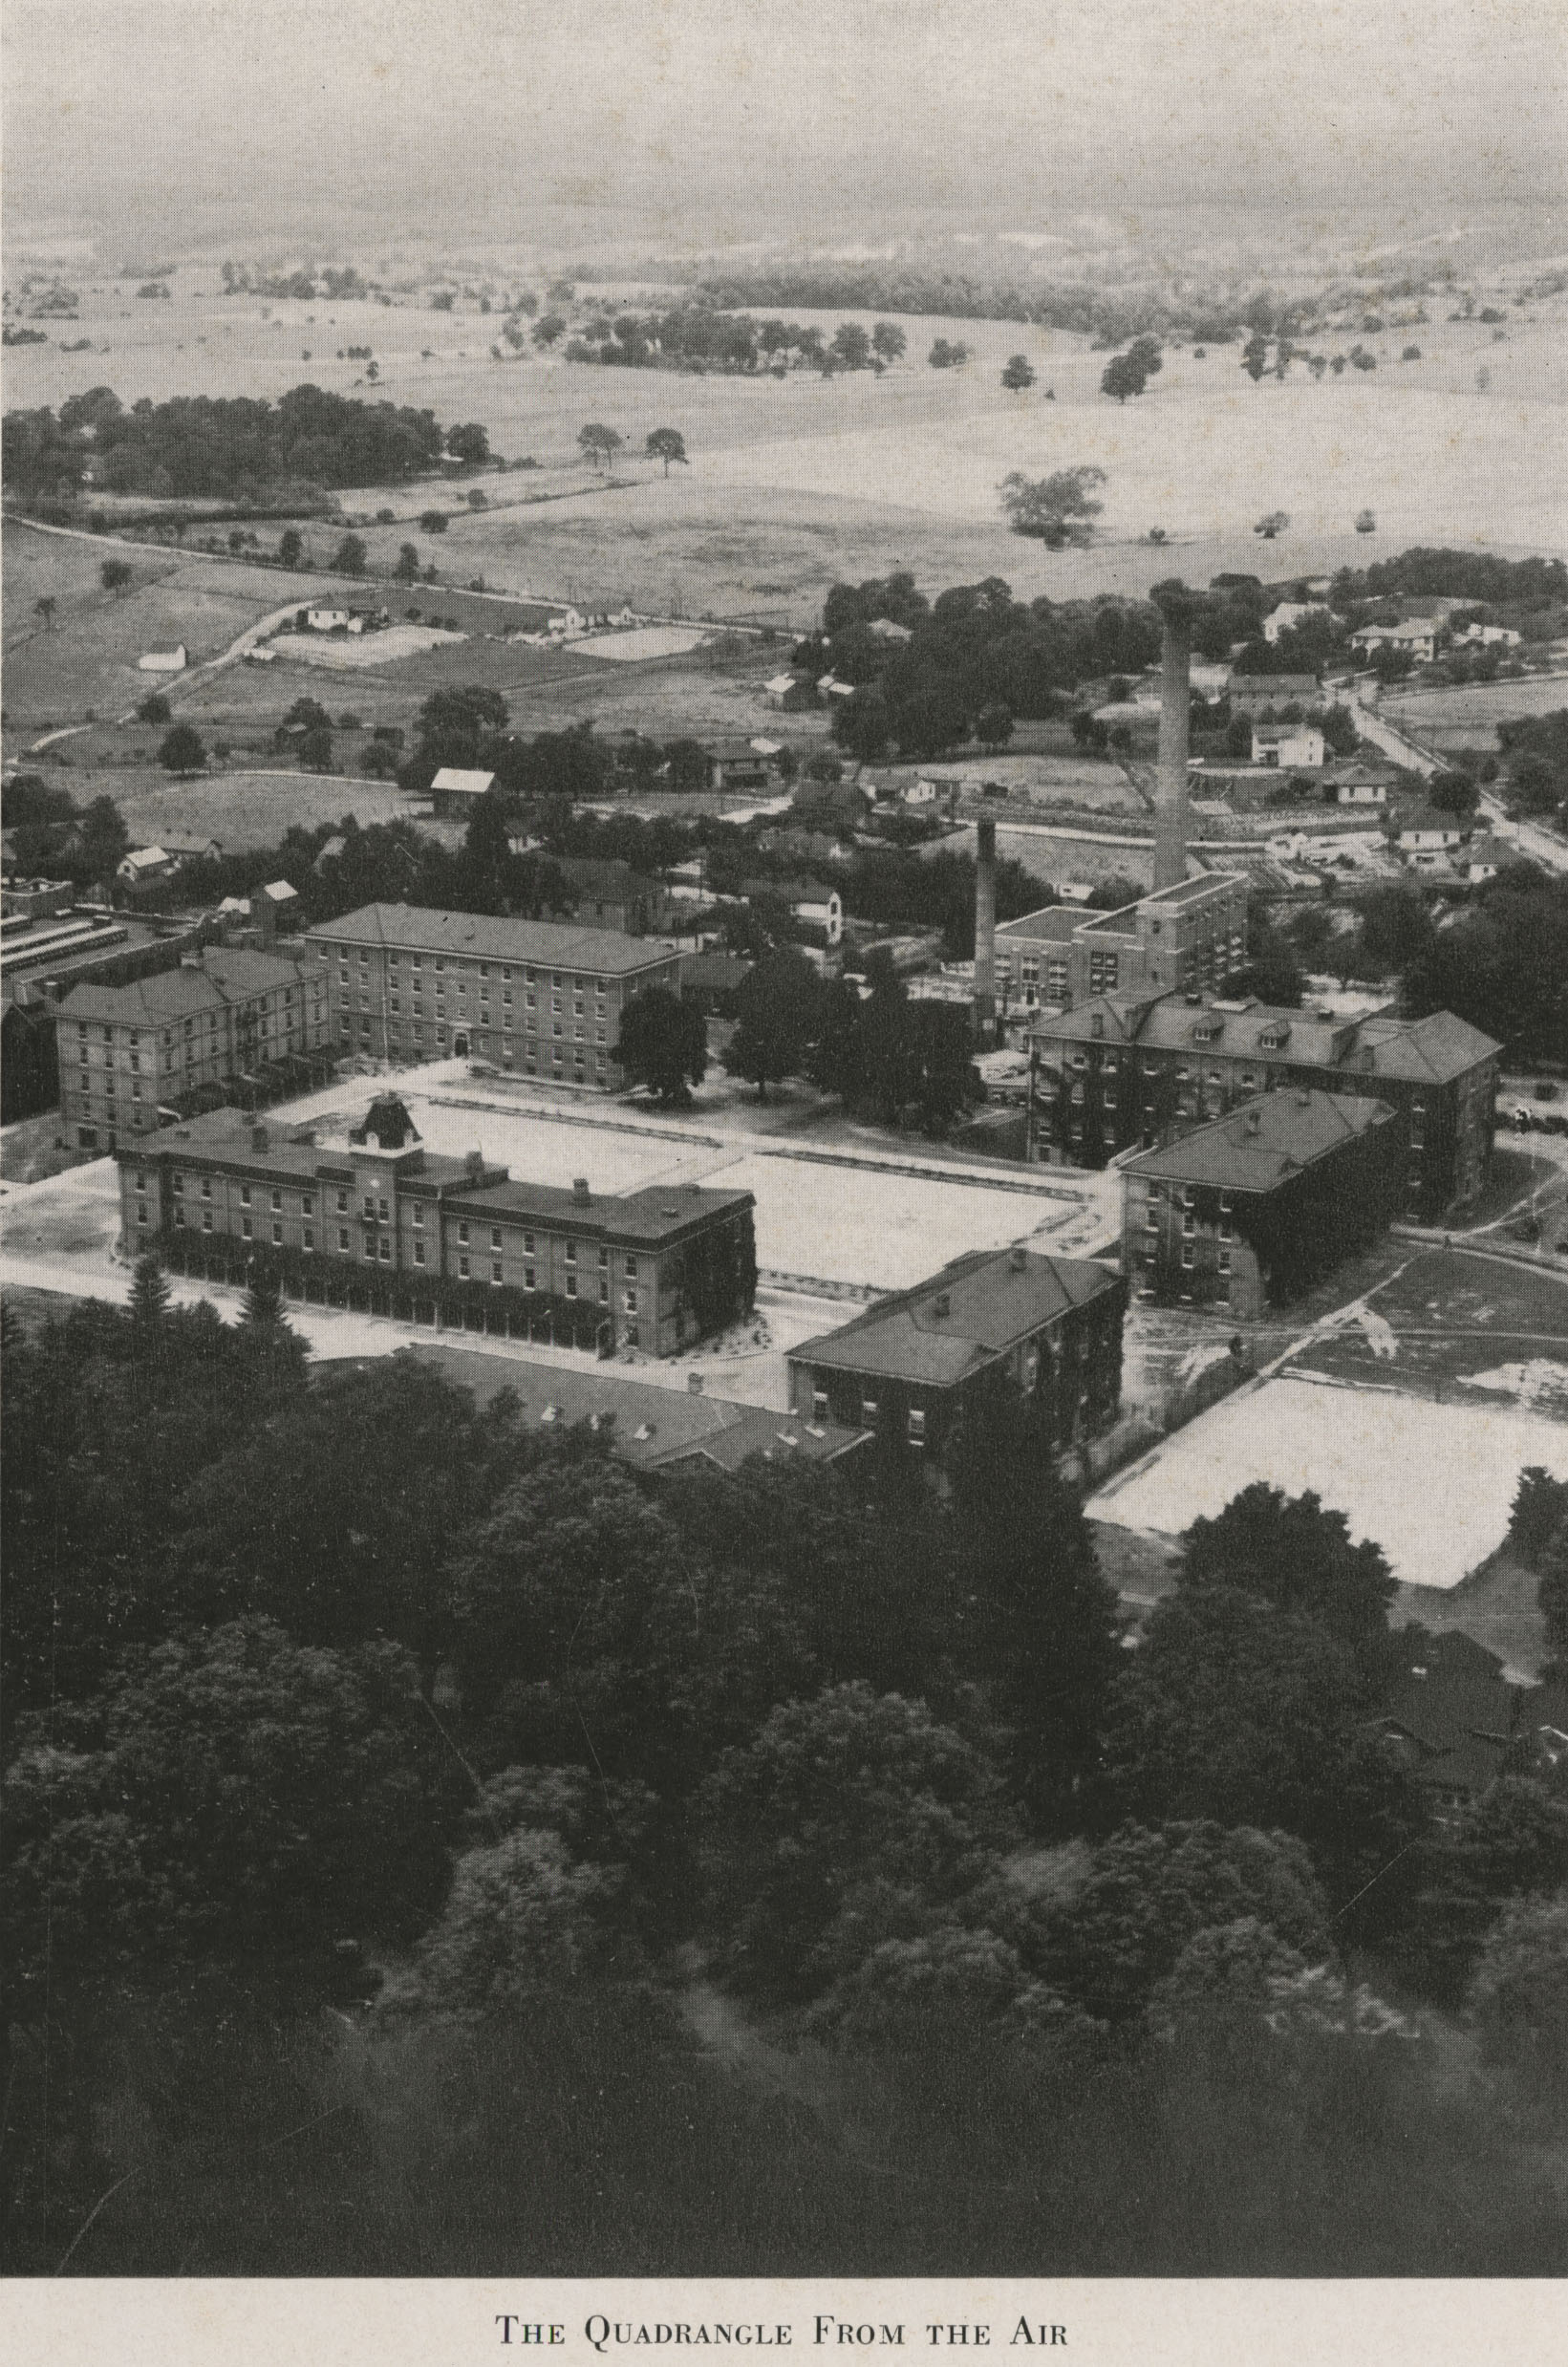 The Quadrangle from the Air, from the 1931 Bugle